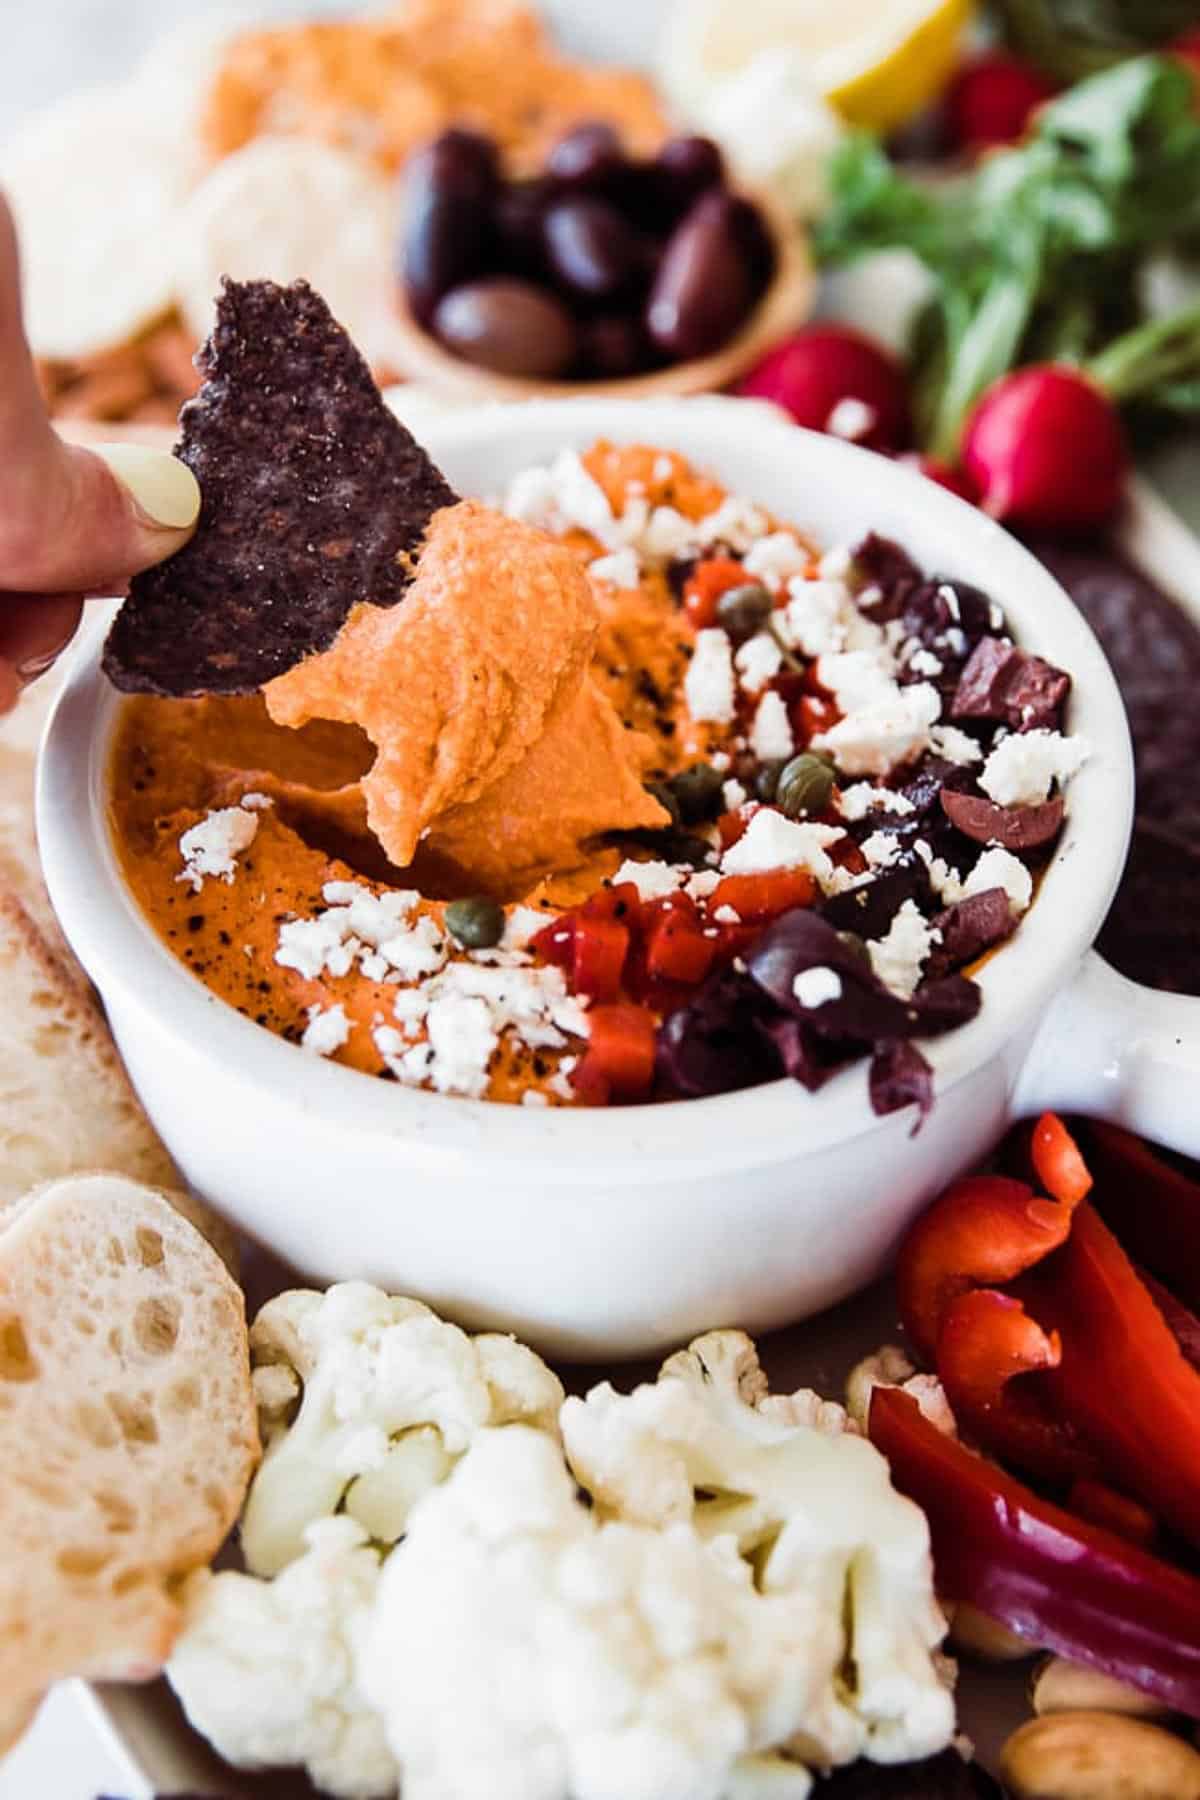 Roasted red pepper hummus being dipped with a blue tortilla chip.